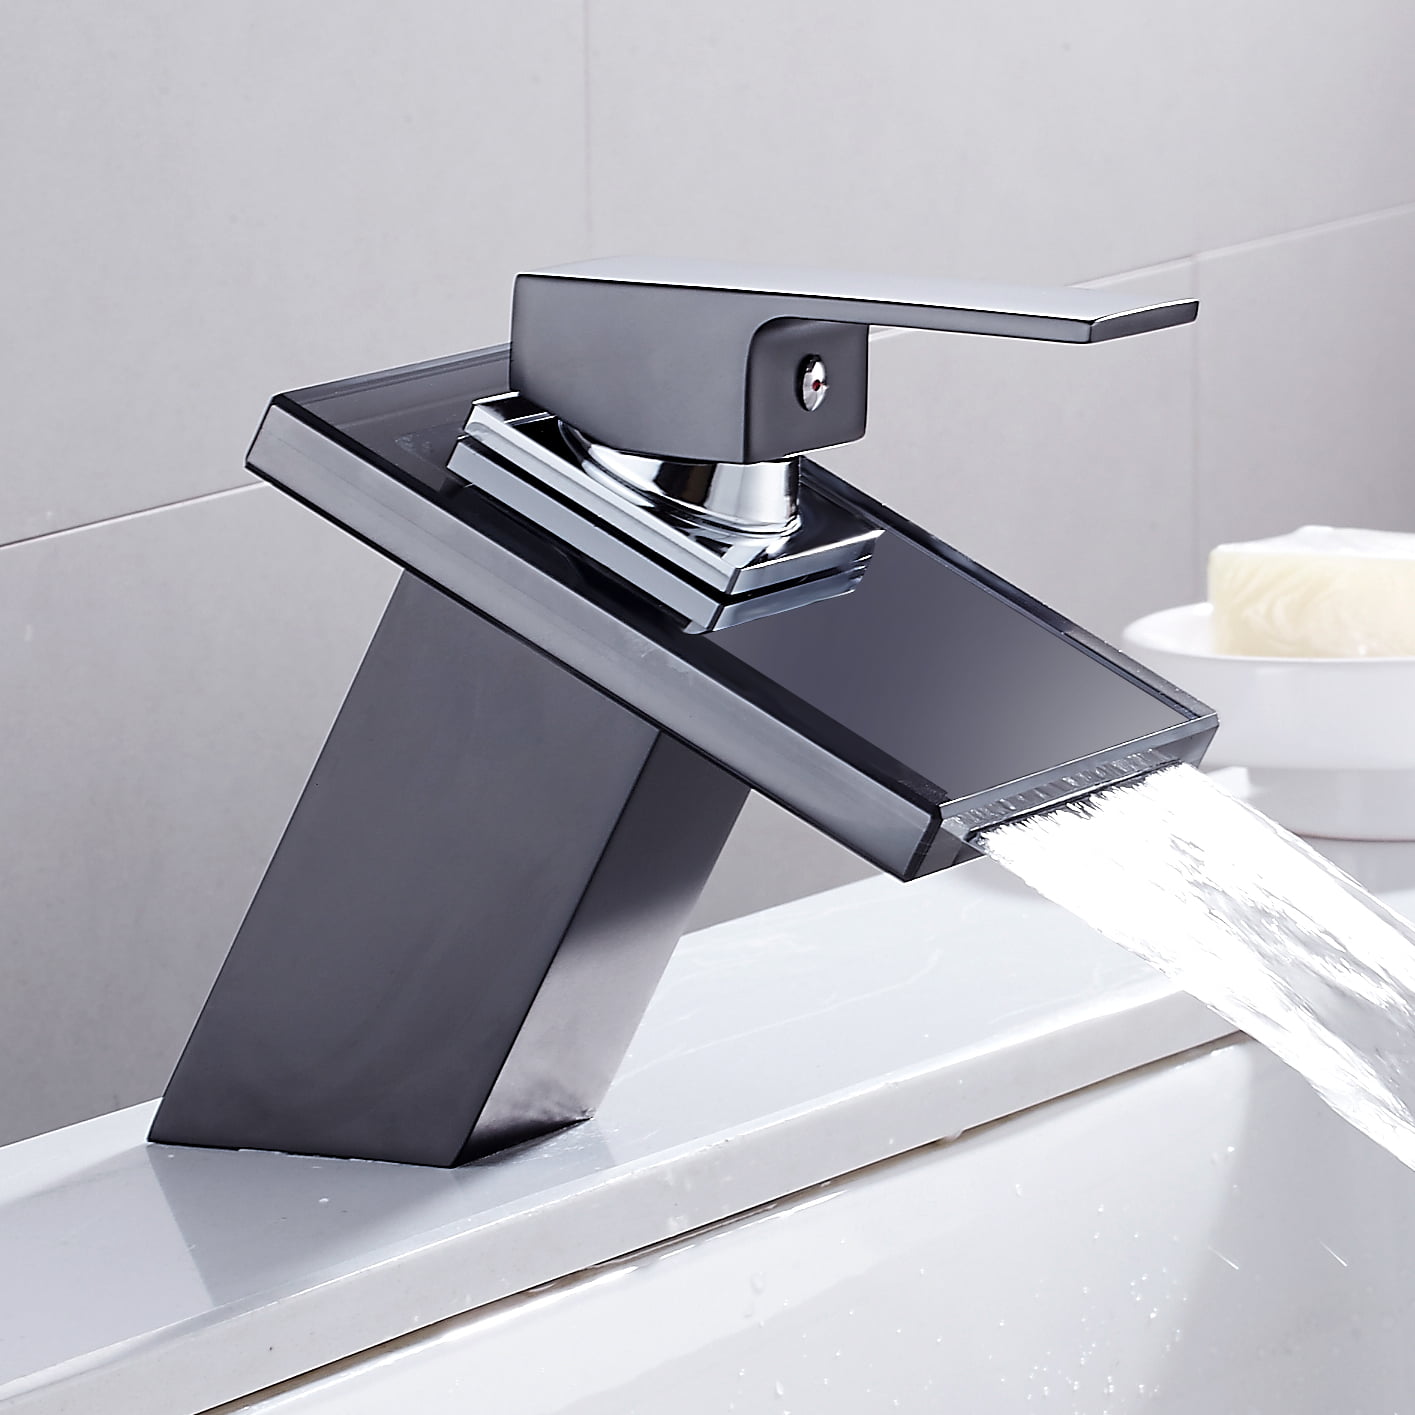 Bathtub Basin Mixer Brushed Nickel Waterfall Glass Faucet Wall Mount 1 Lever Tap 